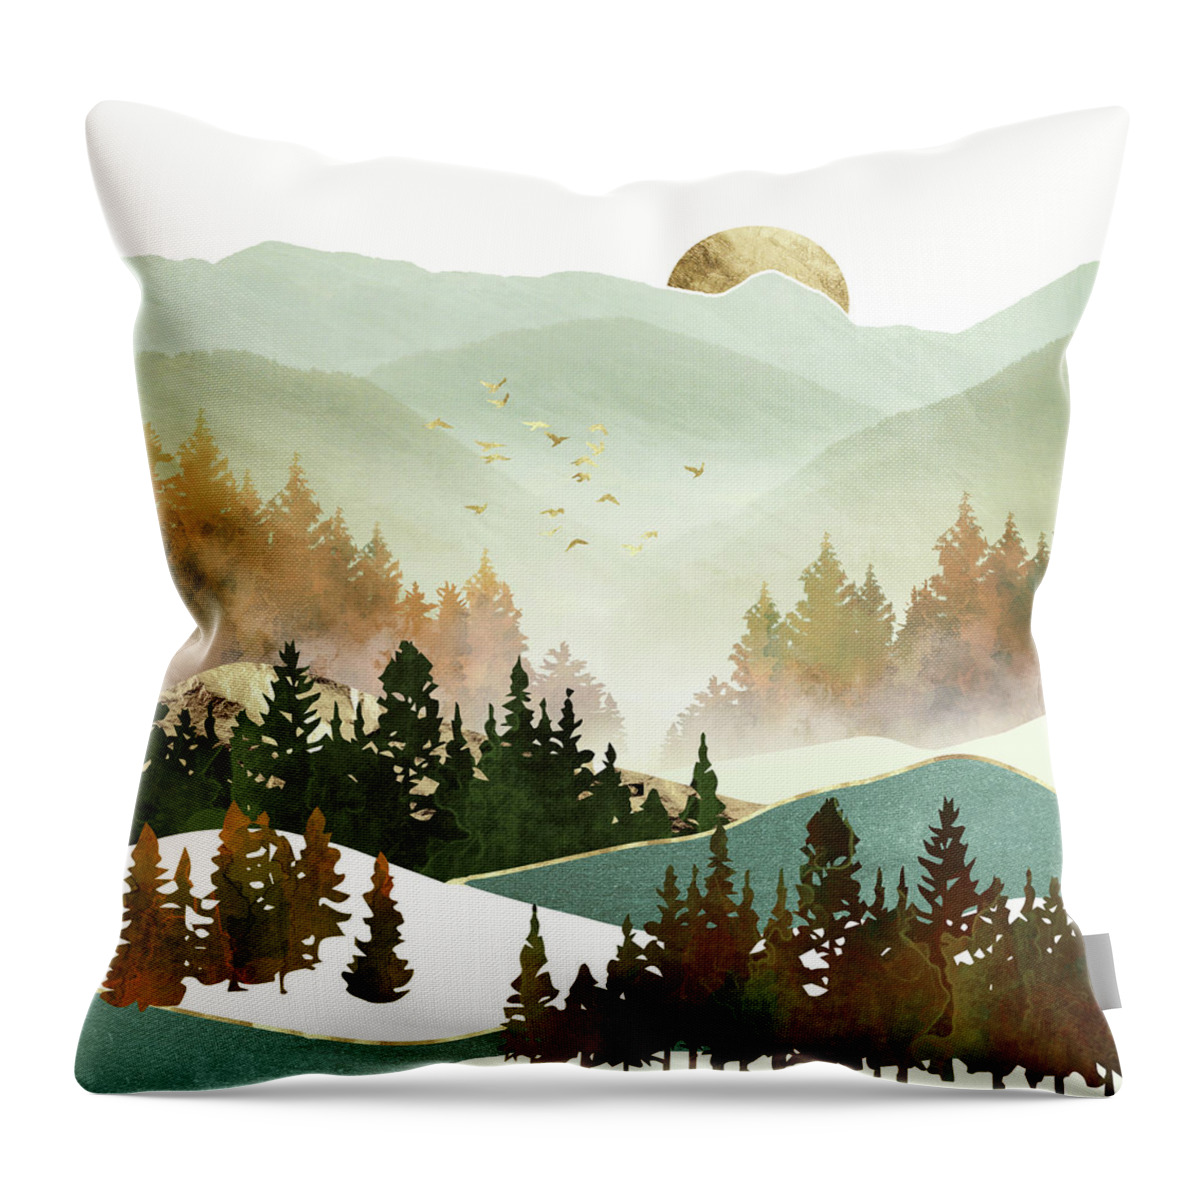 Fall Throw Pillow featuring the digital art Fall Morning by Spacefrog Designs